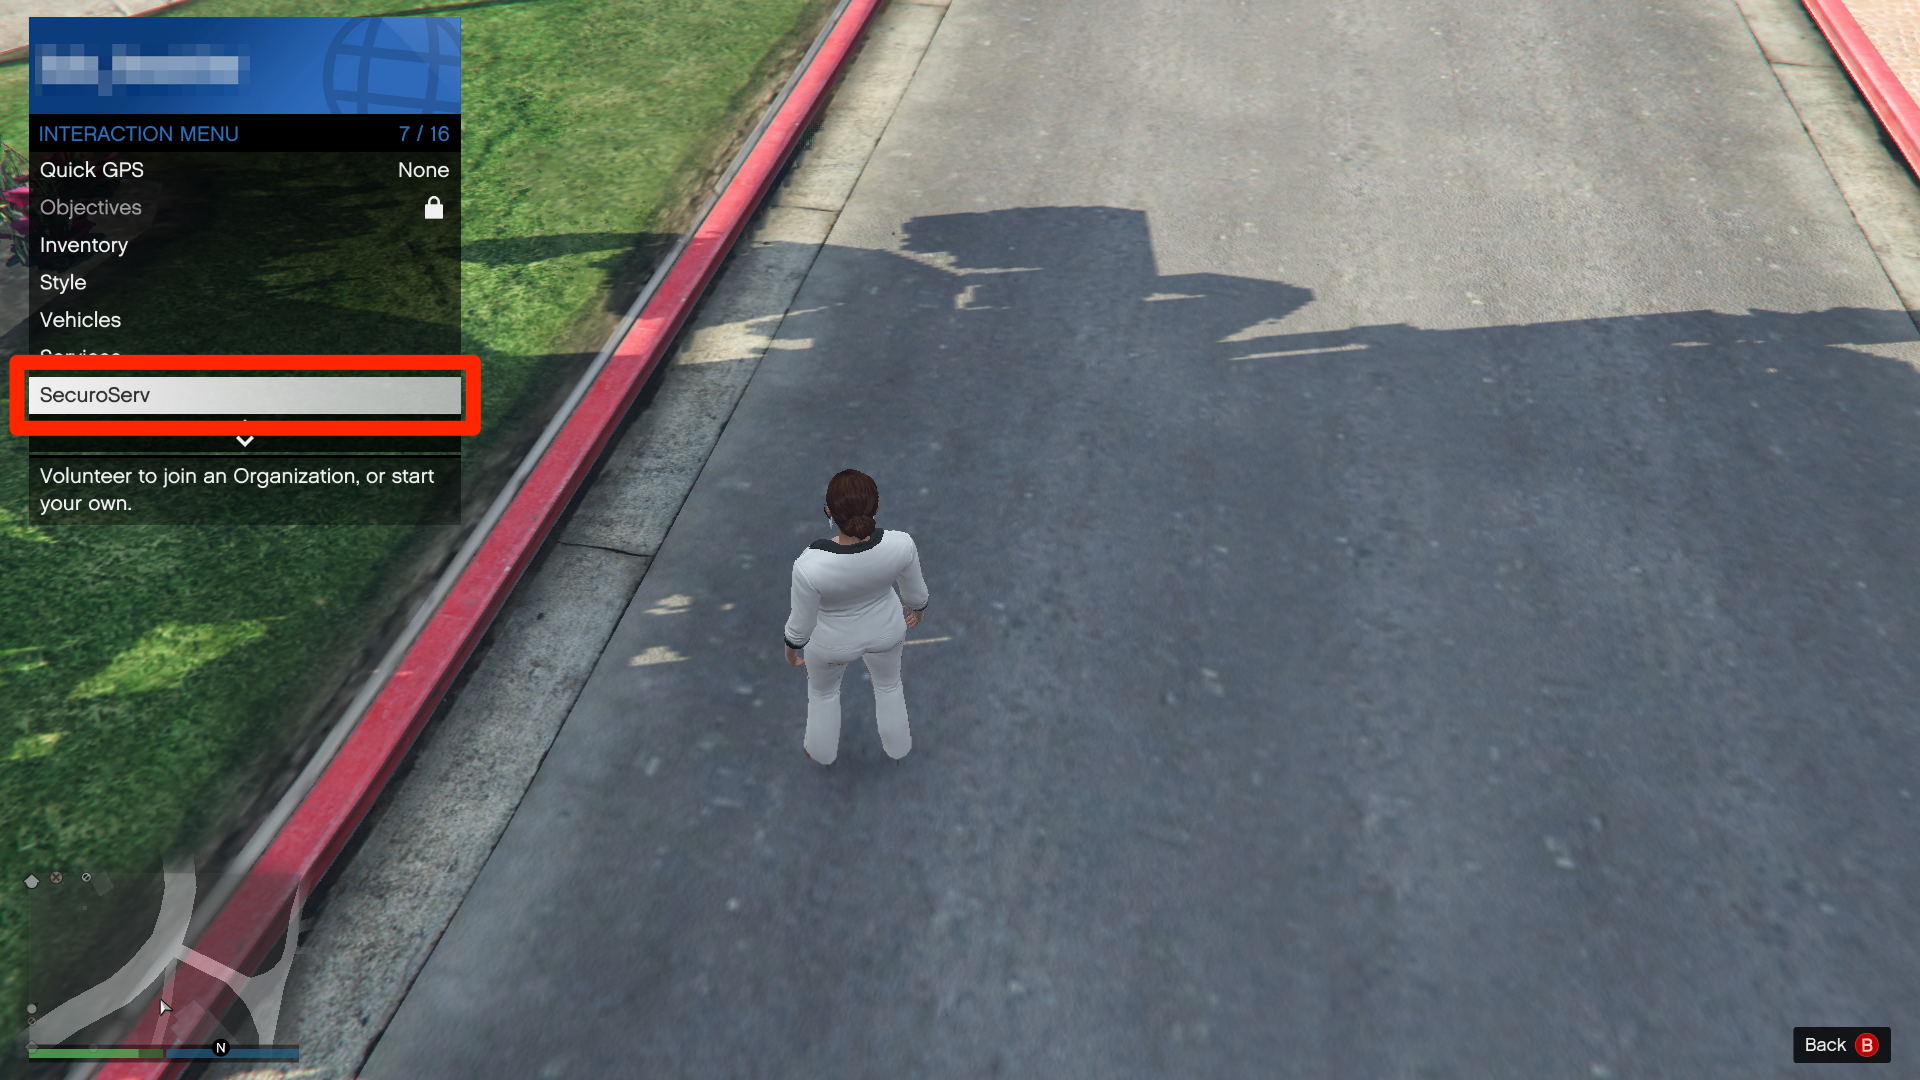 The Interaction Menu in Grand Theft Auto Online.